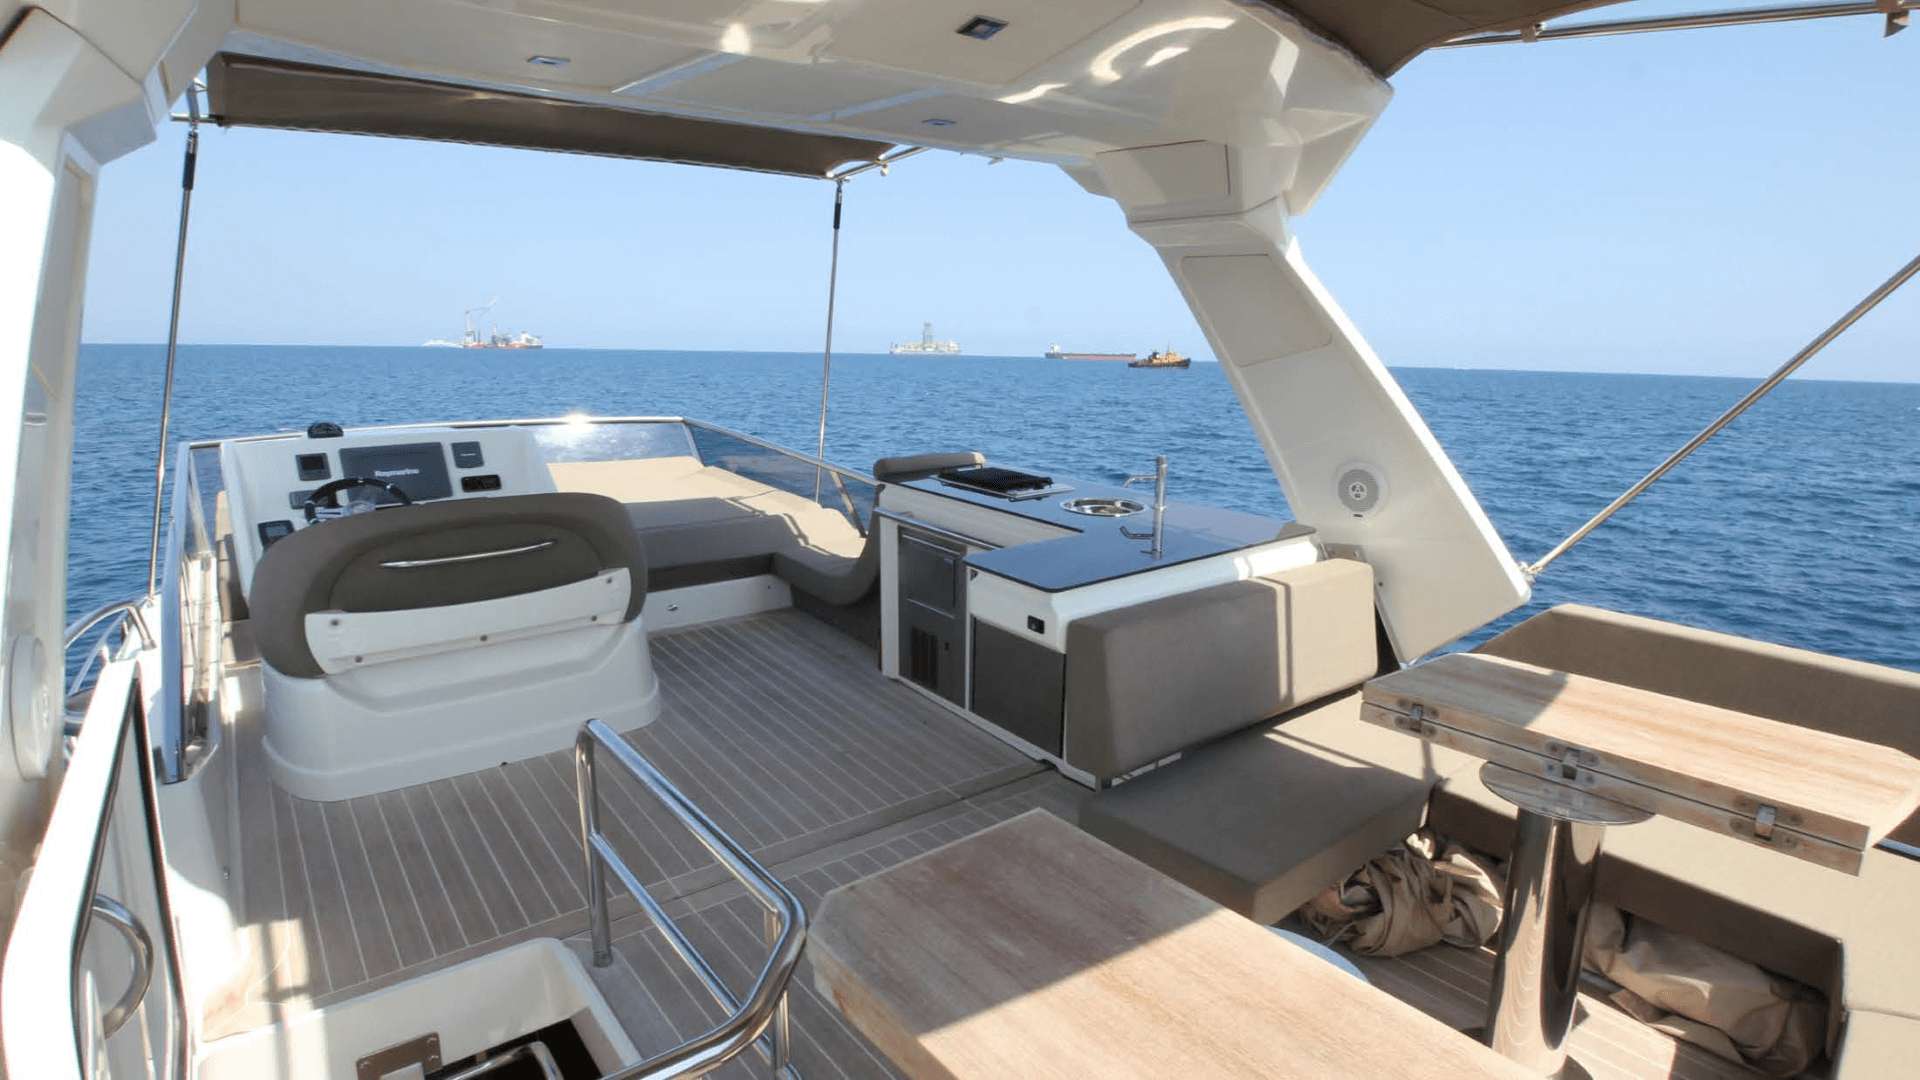 Cranchi 58 - Yacht Charter Cyprus & Boat hire in Cyprus Limassol Port of Limassol 3